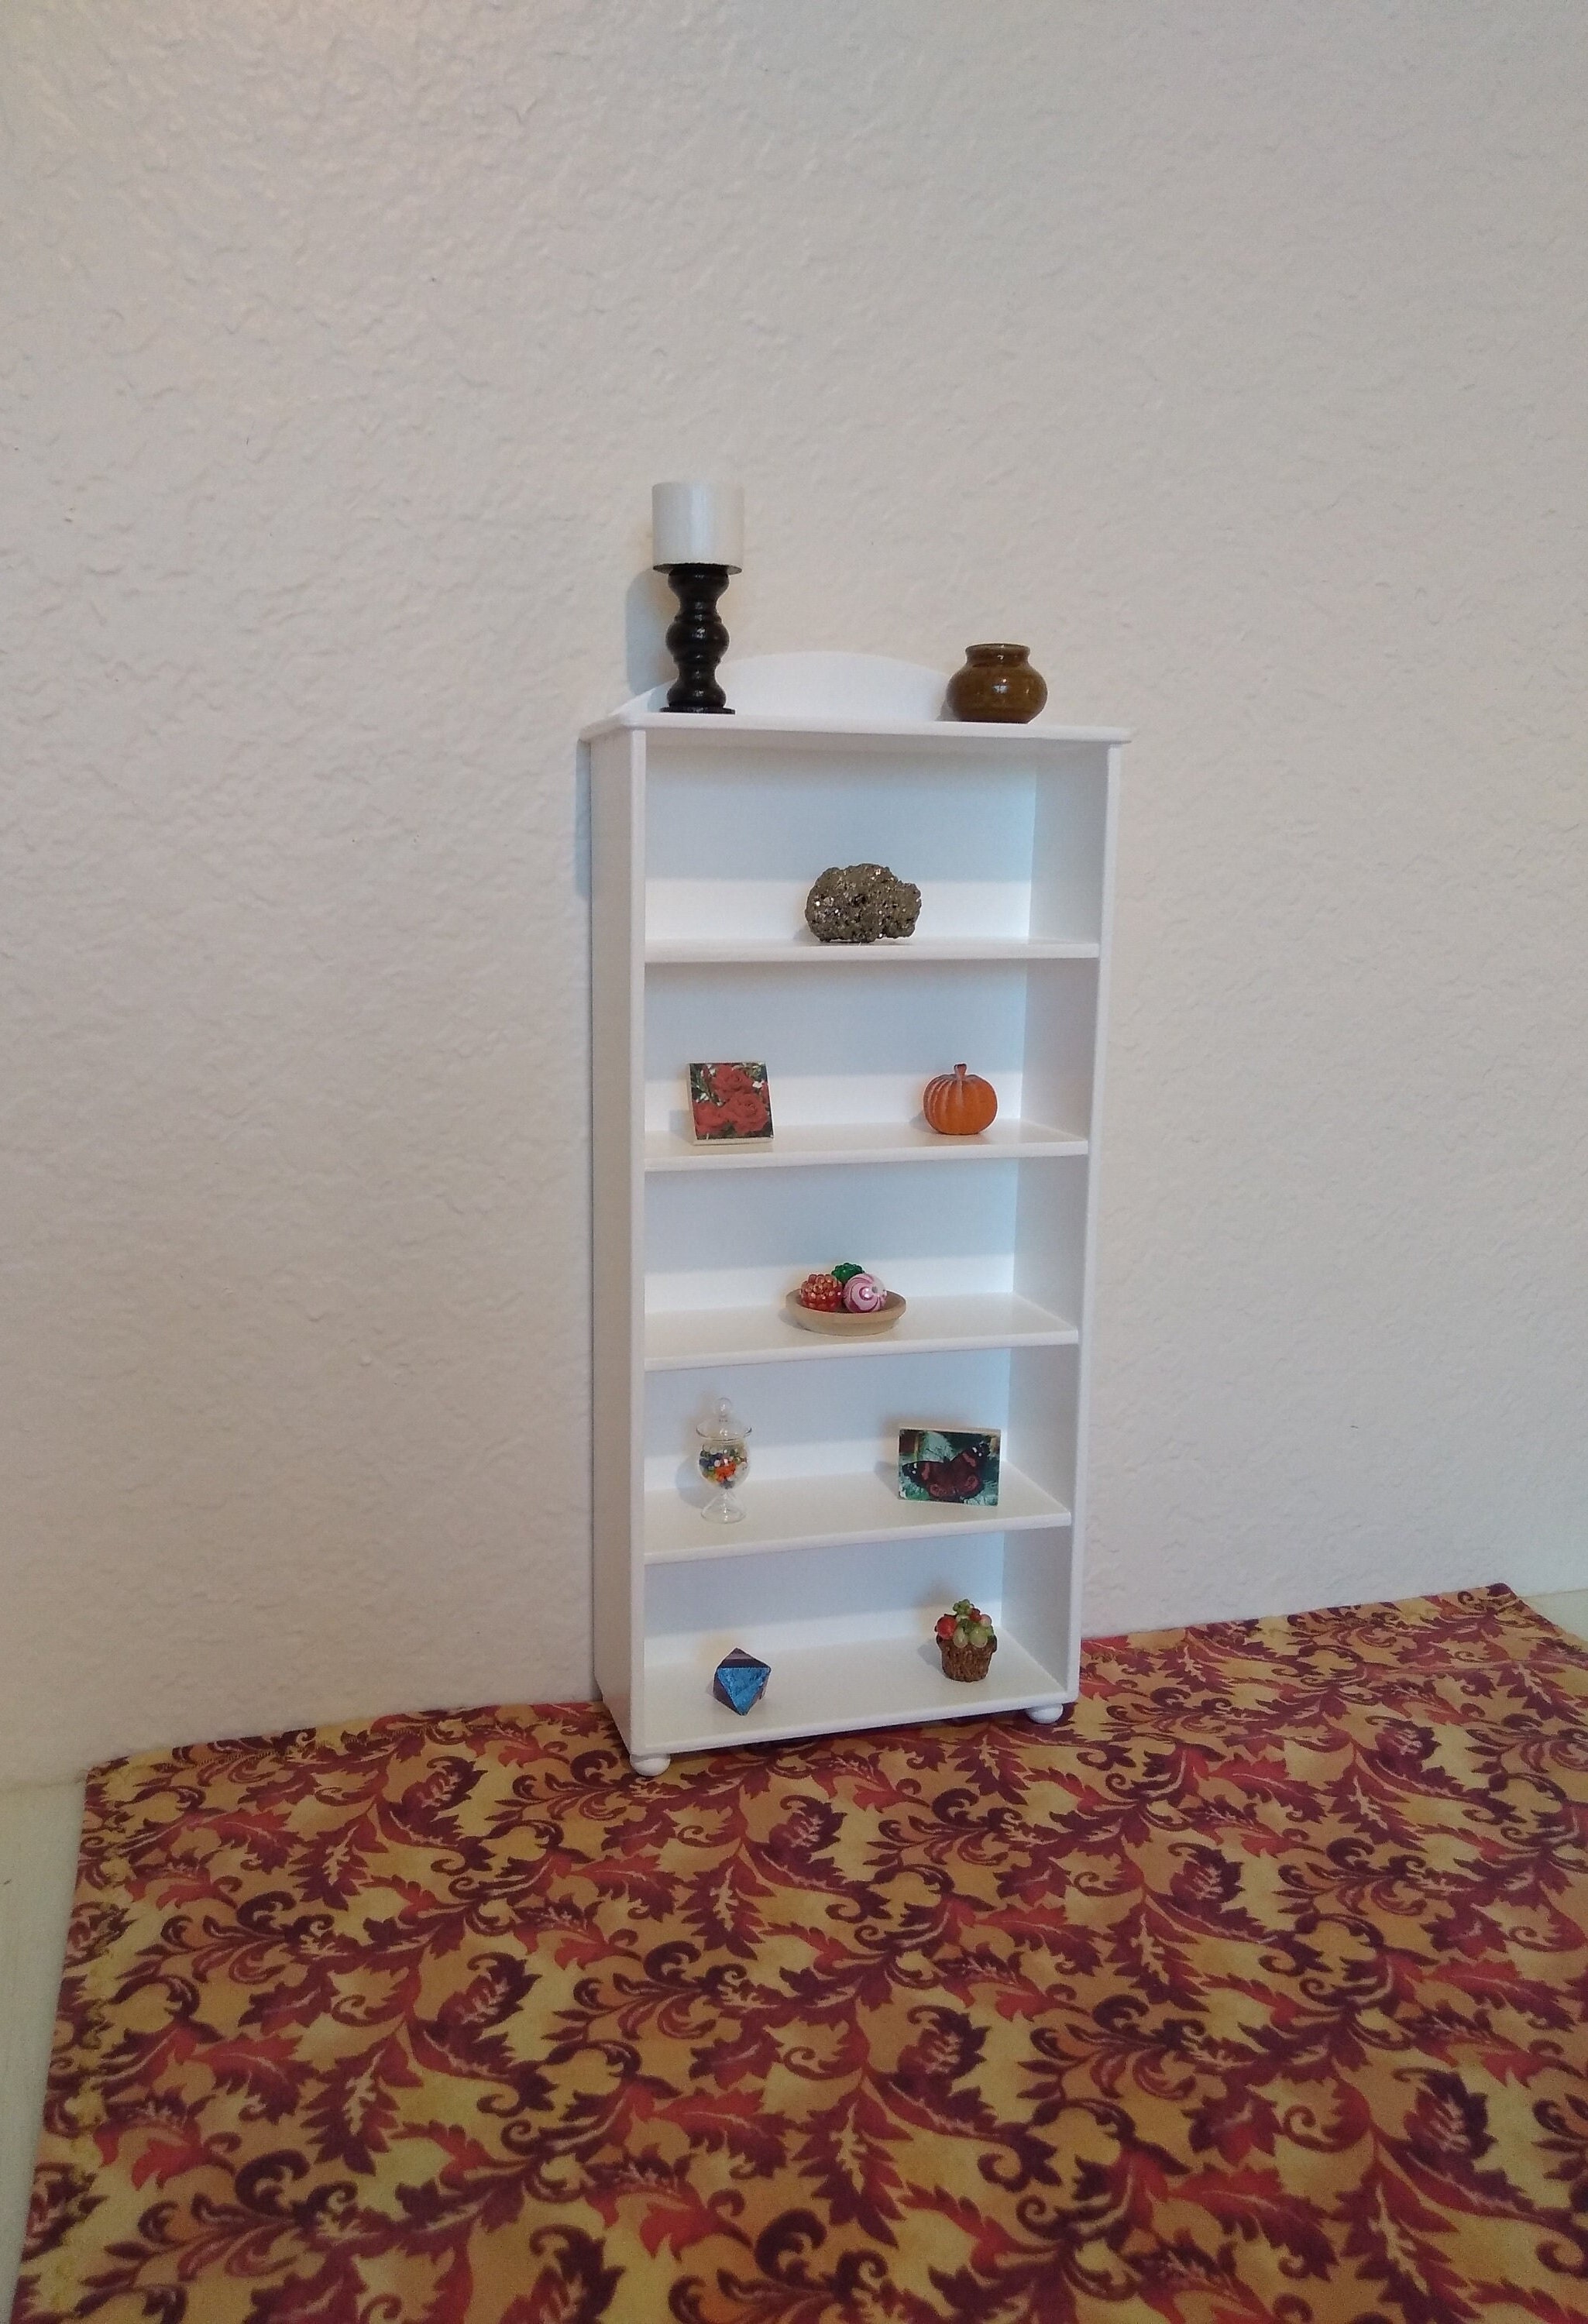 🥇*NEW* Cupcake Stands Tool Free, Rustic Risers For Display Ideal Craft  Funko Pop Shelves - Wall Shelves & Ledges, Facebook Marketplace